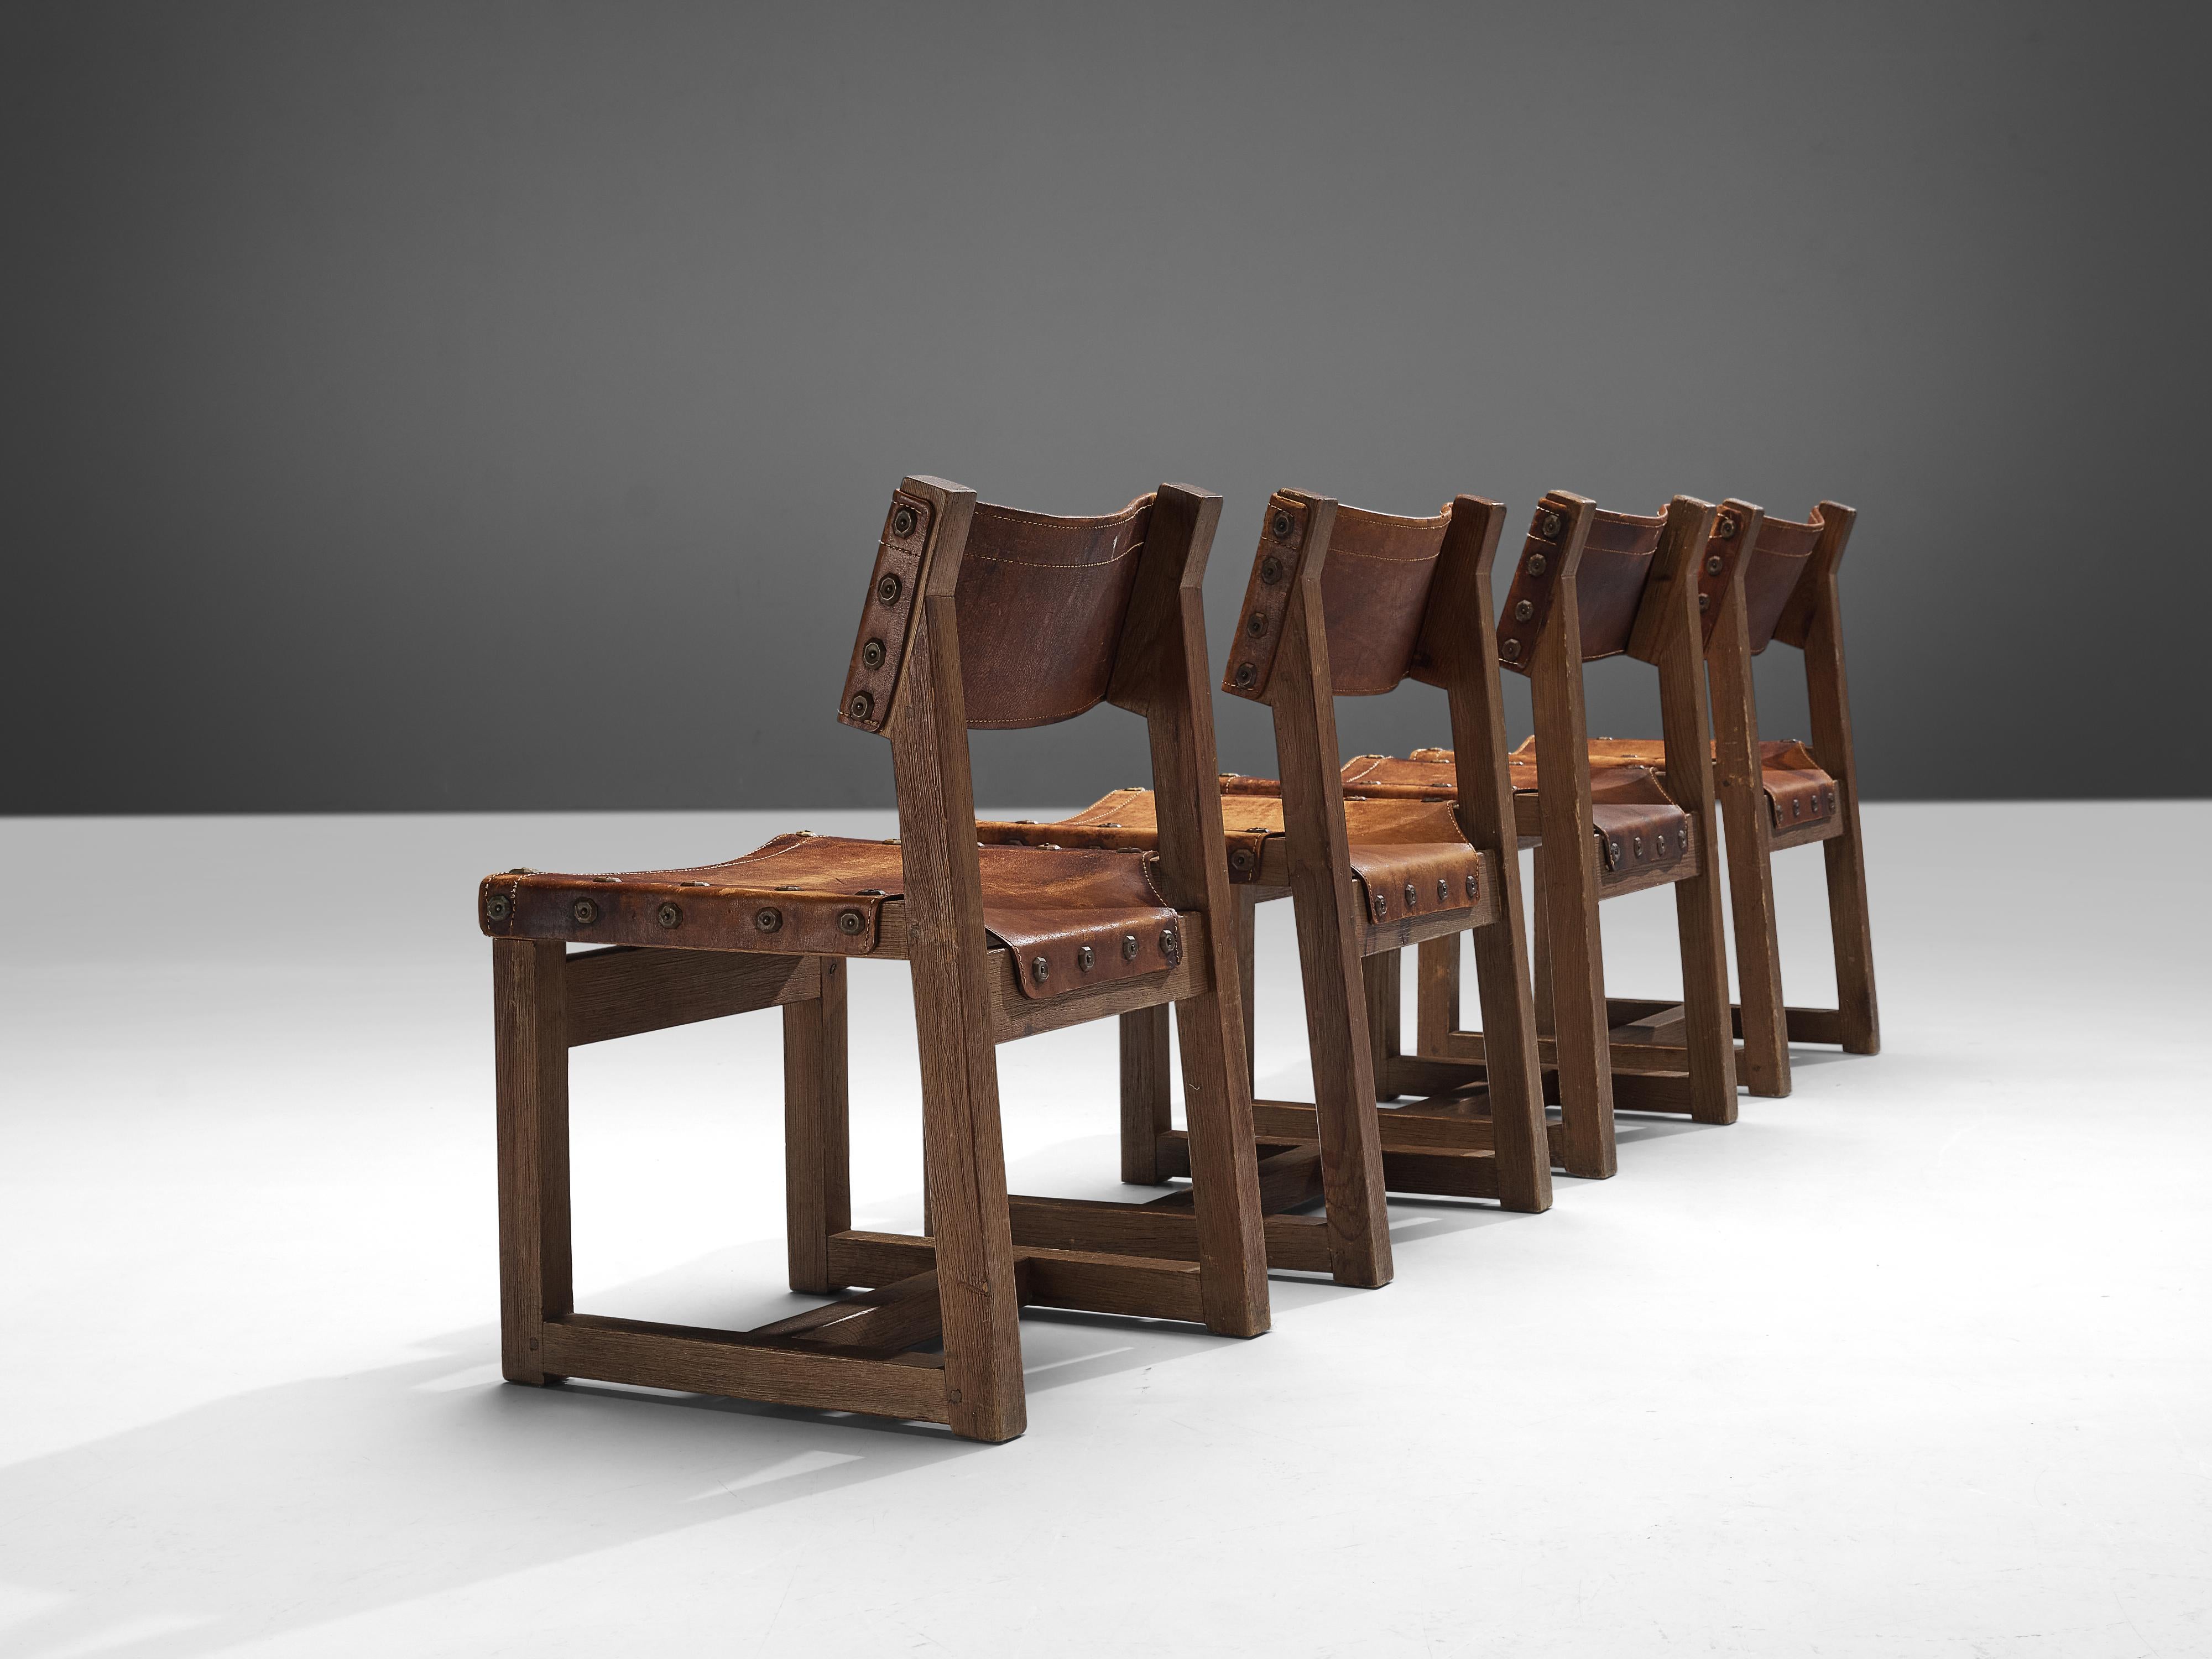 Brutalist Spanish Biosca Set of Four Dining chairs in Cognac Leather 1